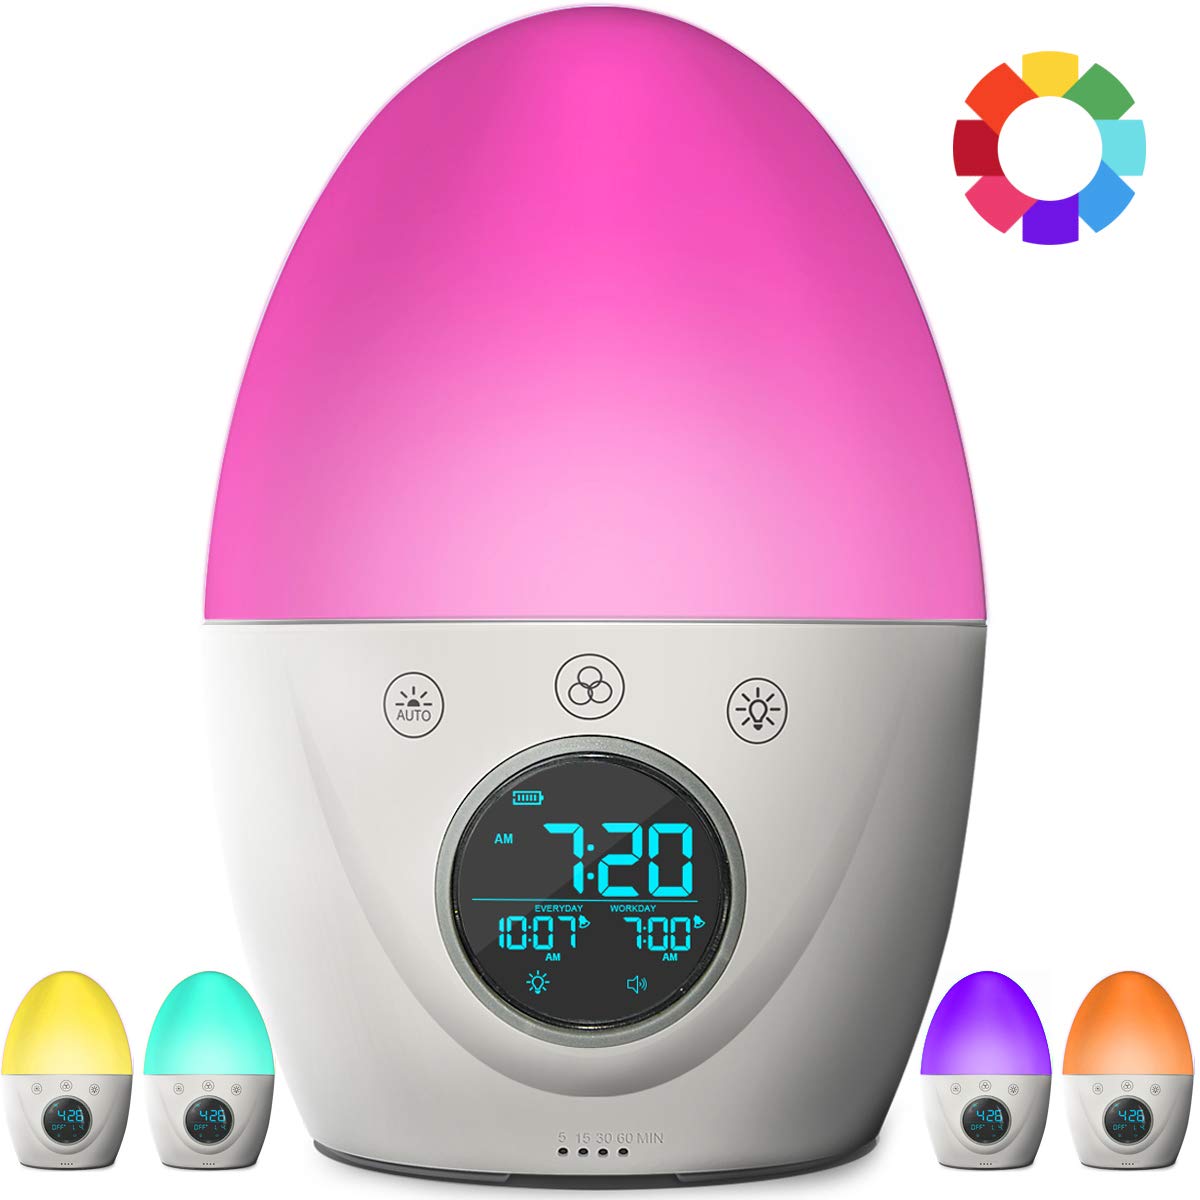 FiveHome Kids Alarm Clock, Children's Sleep Trainer, Color Changing Wake Up Light with Dual Alarms,3 Alarm Modes, 5 Nature Sounds,Sleep Timer